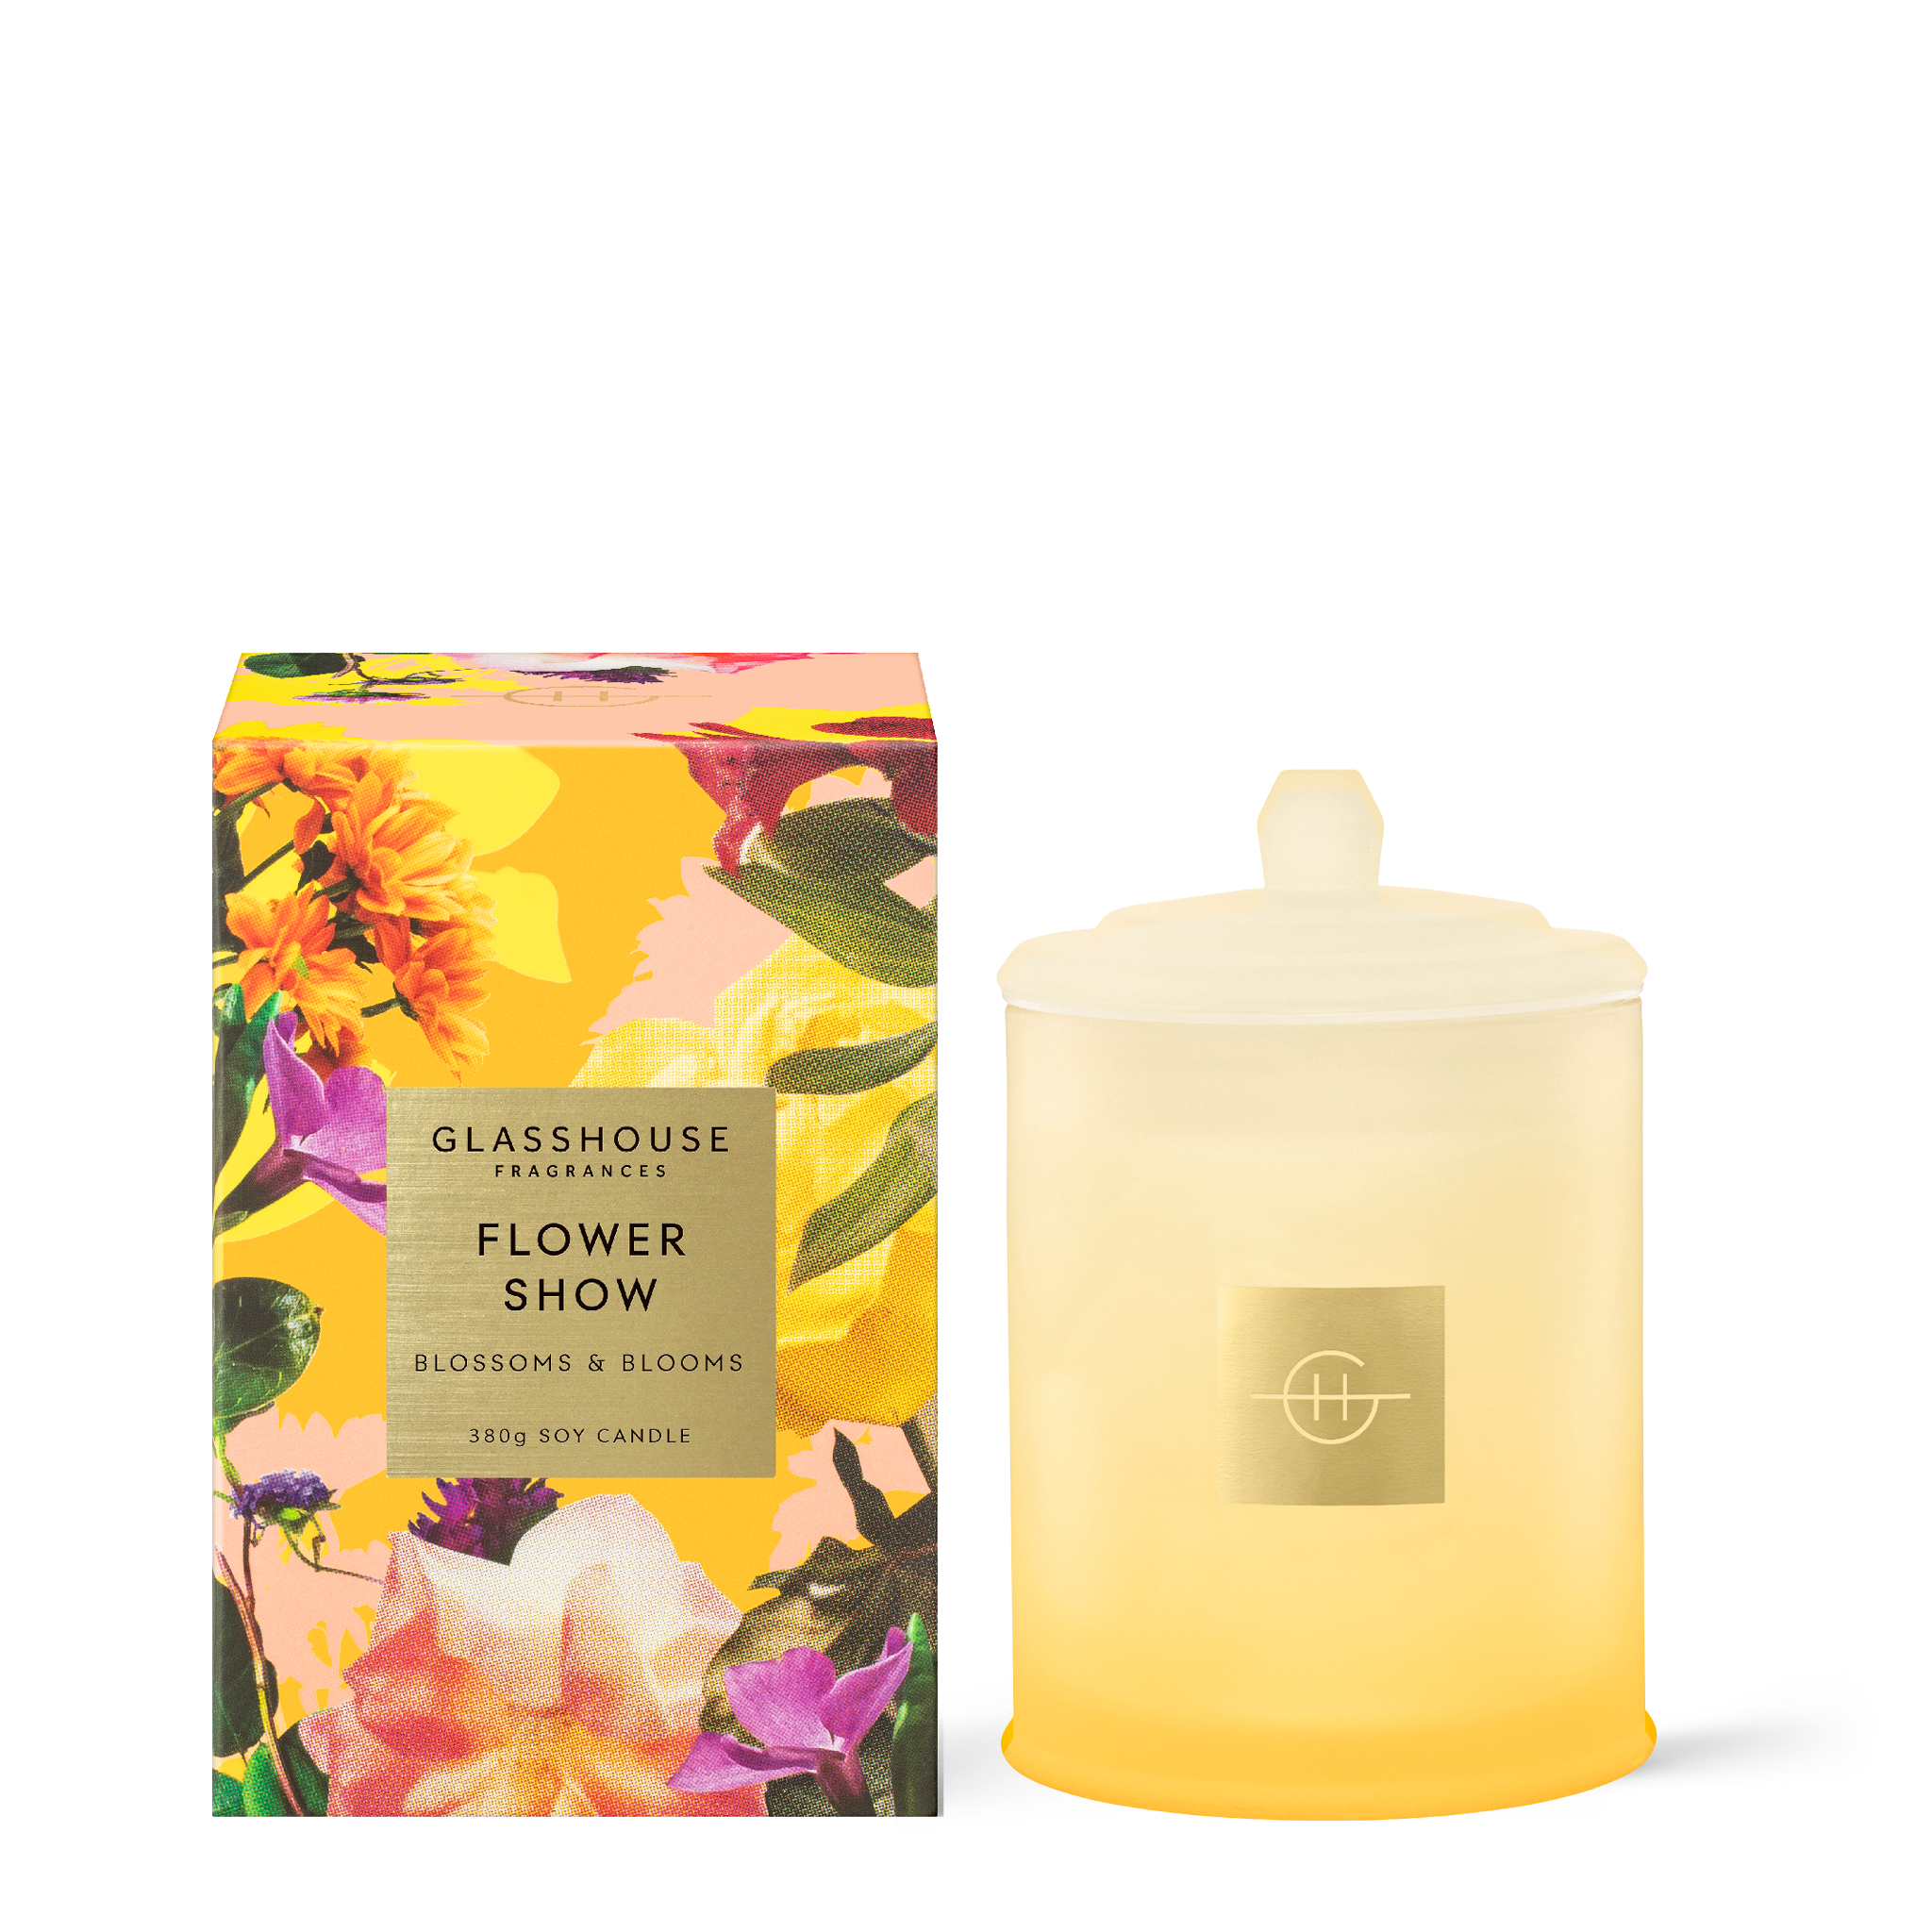 Glasshouse Fragrance Flower Show 380g Soy Candle front of product